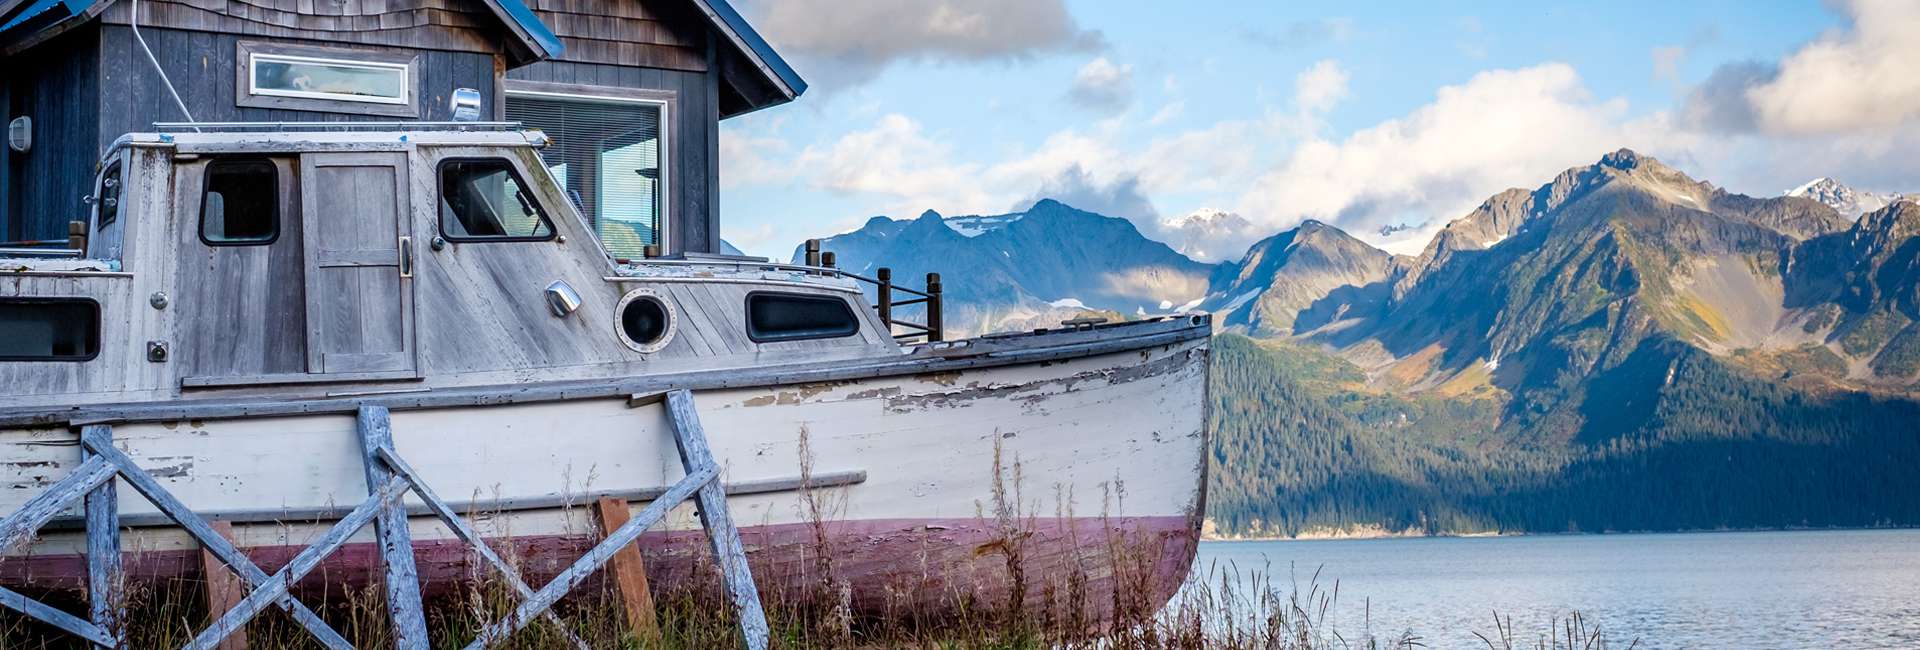 An old ship standing on the ocean shore in the bay of Kenai, Alaska, with a mountainbackground